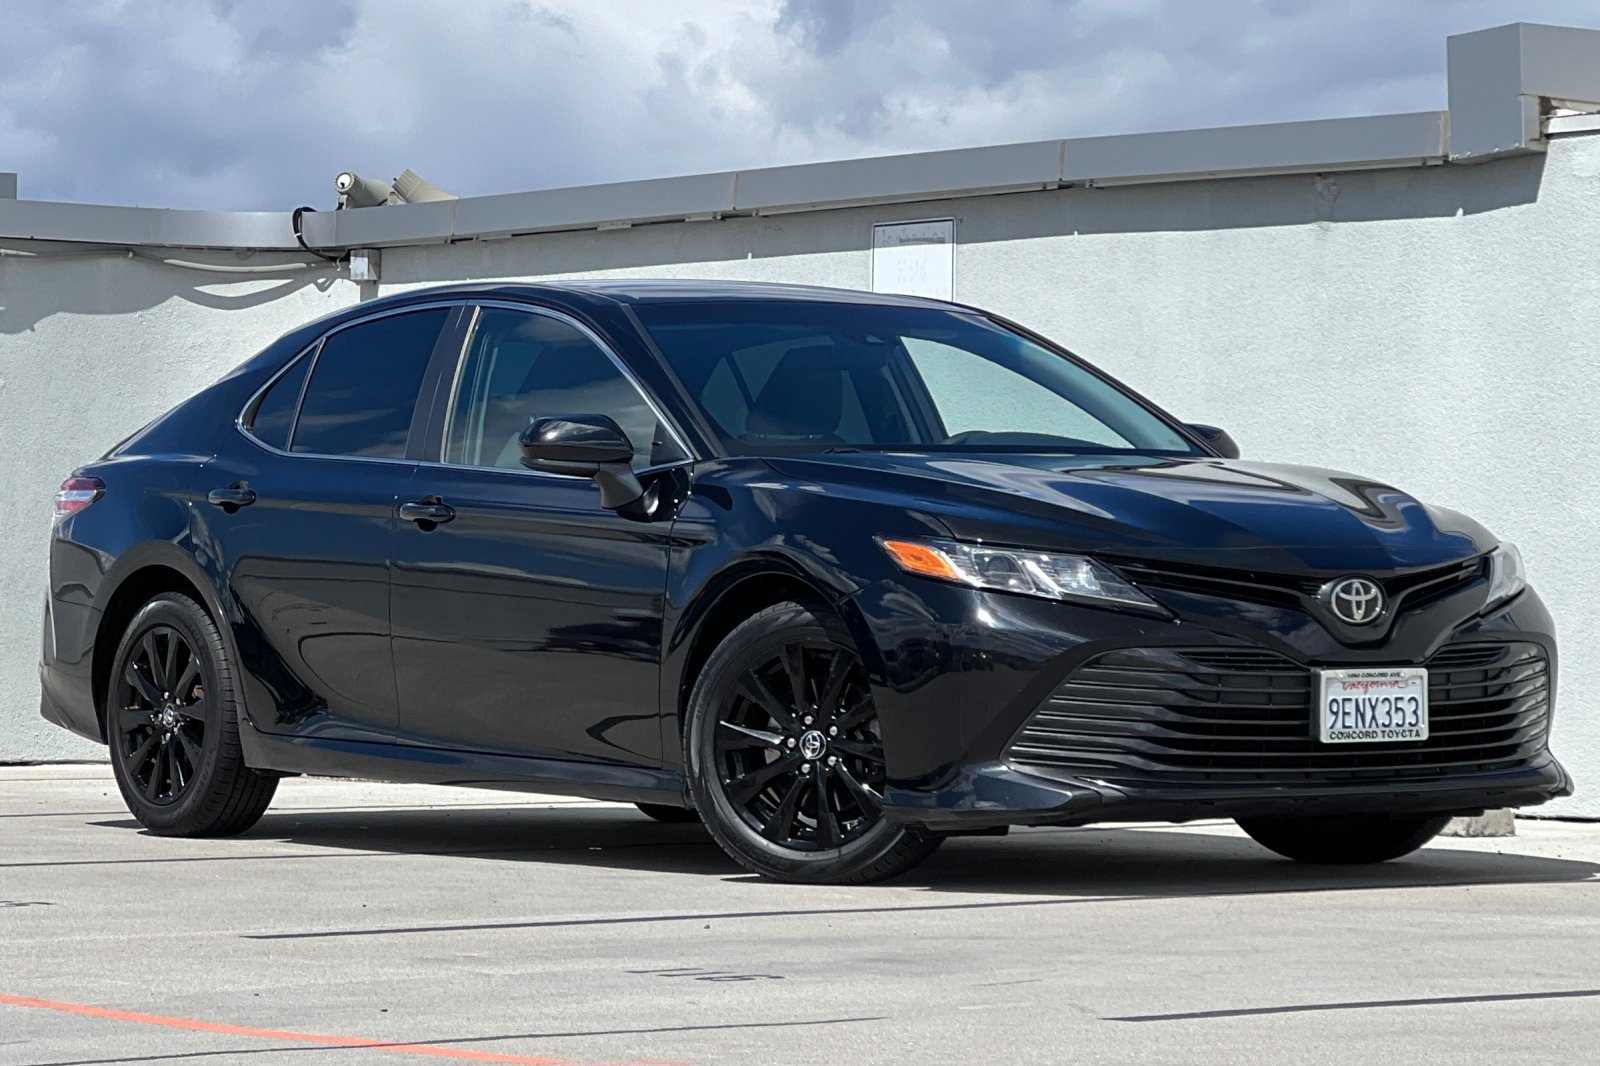 font color=black>Pre-Owned Specials</font> | Concord Toyota